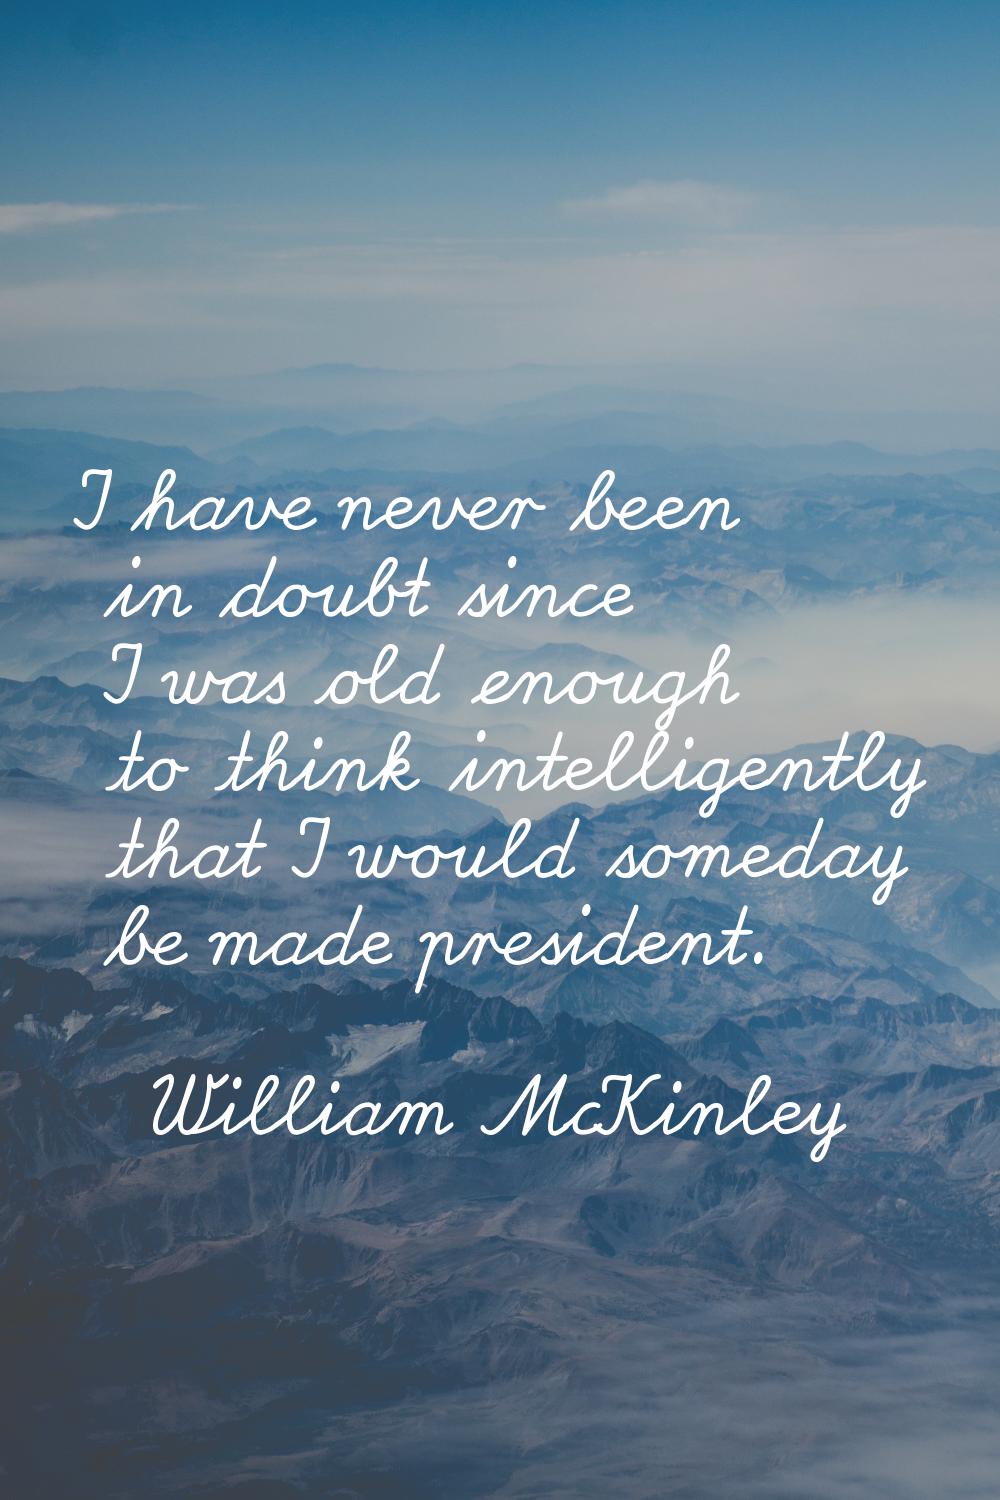 I have never been in doubt since I was old enough to think intelligently that I would someday be ma